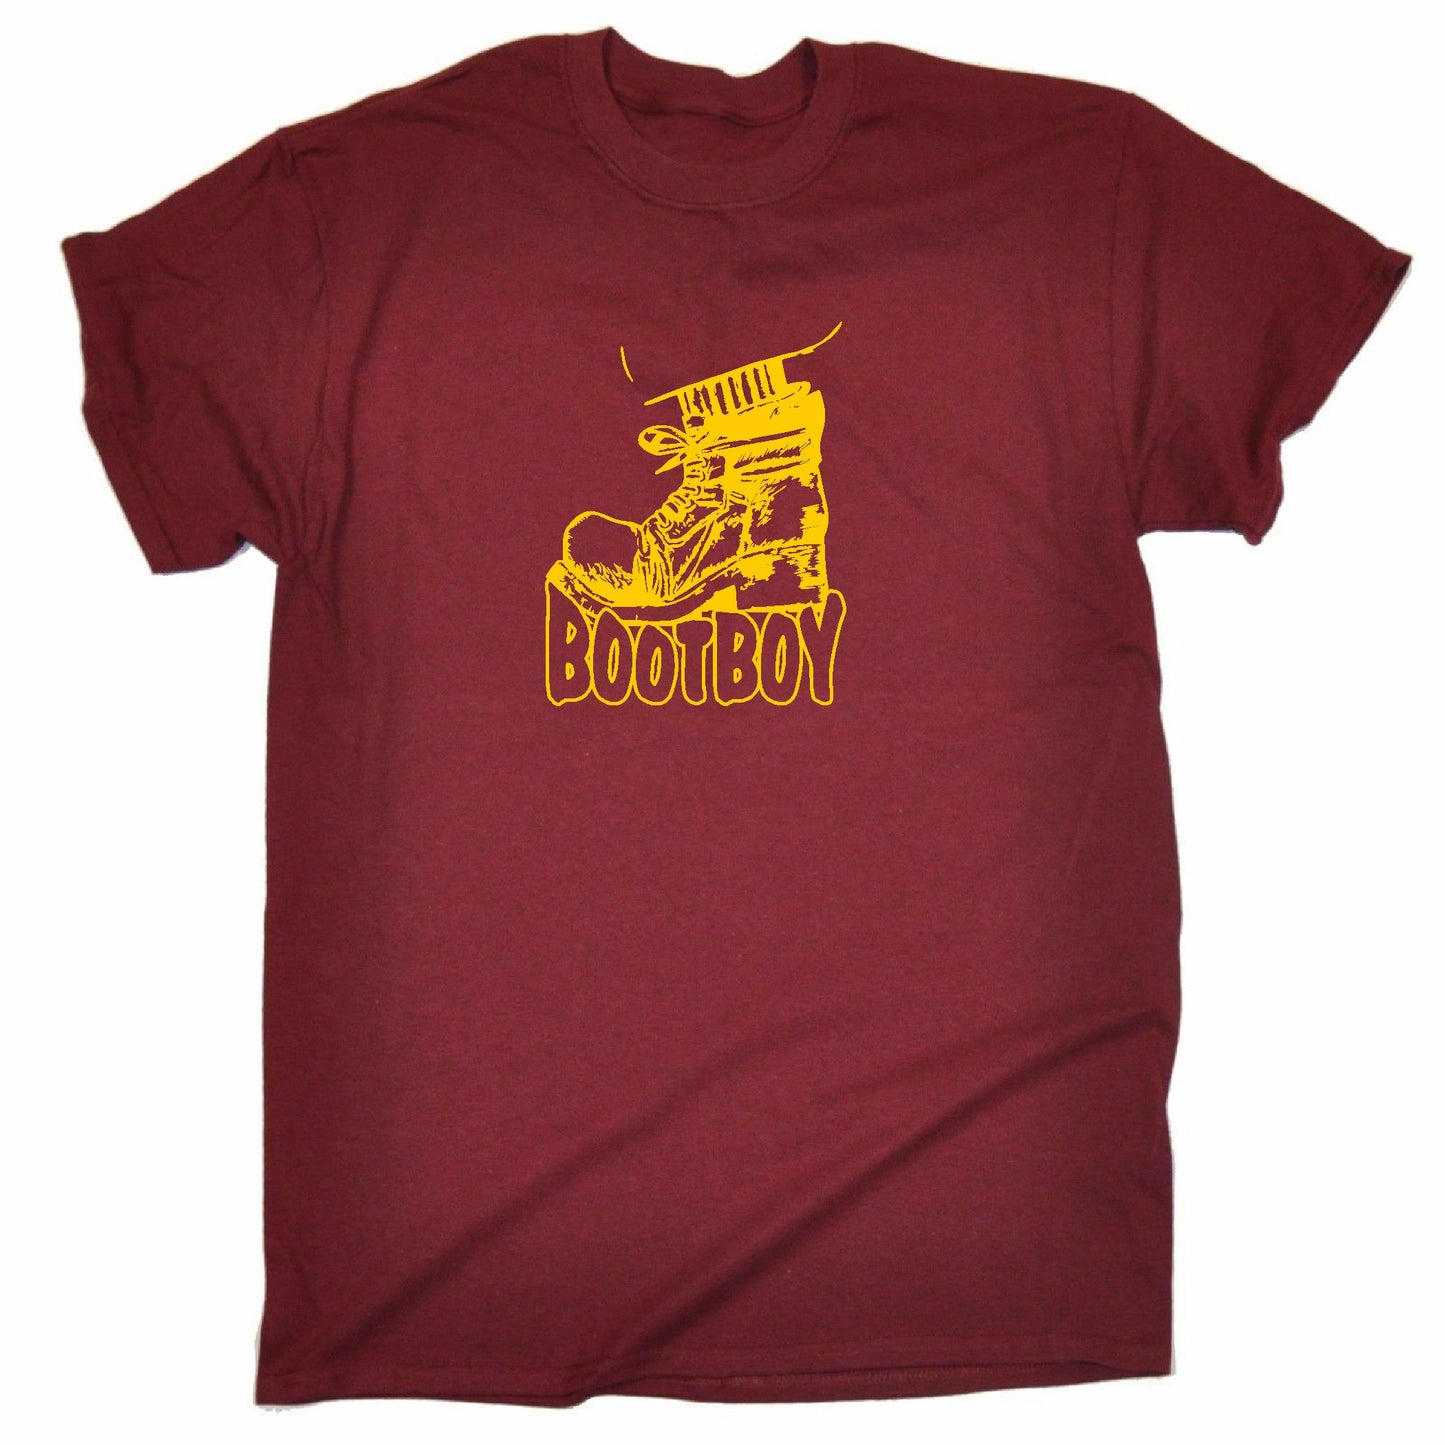 Bootboy Boot T-Shirt - Retro, 70s, Football, Glam Rock, Various Colours